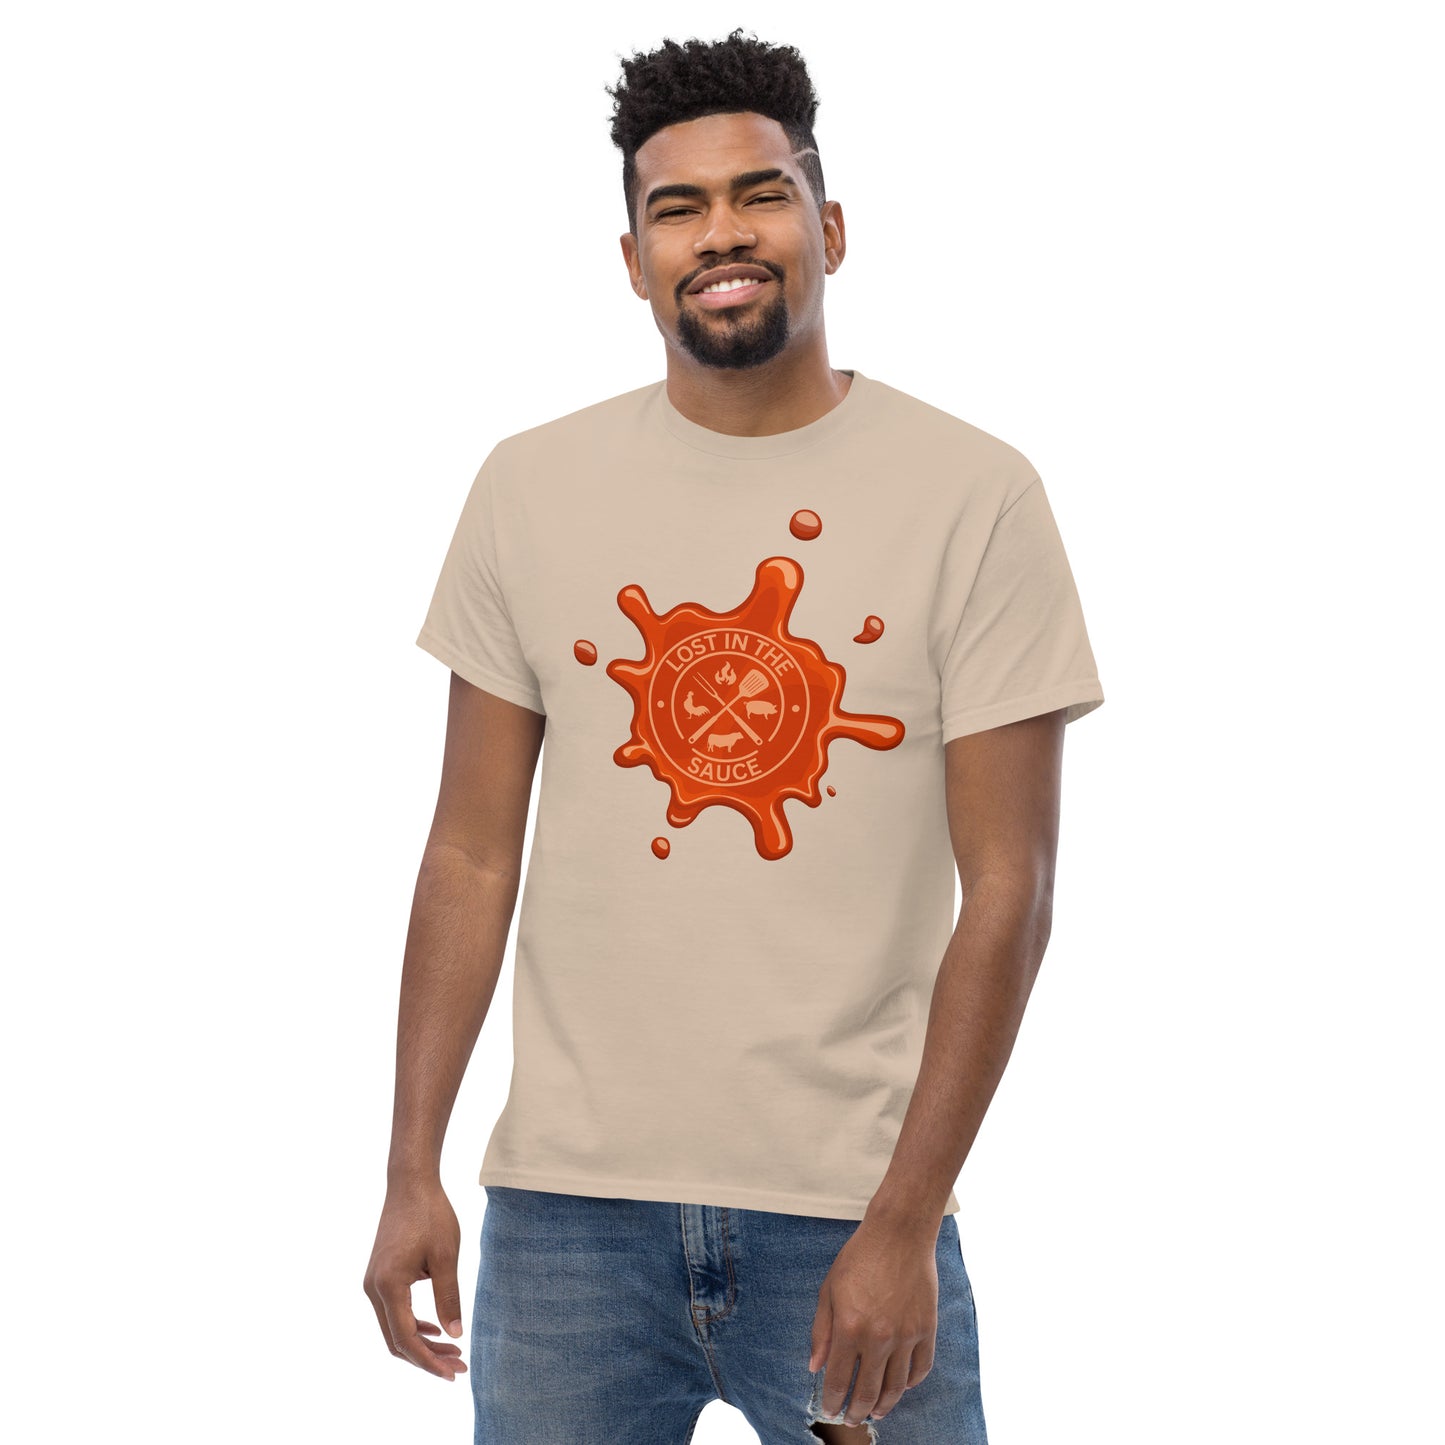 LOST IN THE SAUCE (BBQ) Men's classic tee